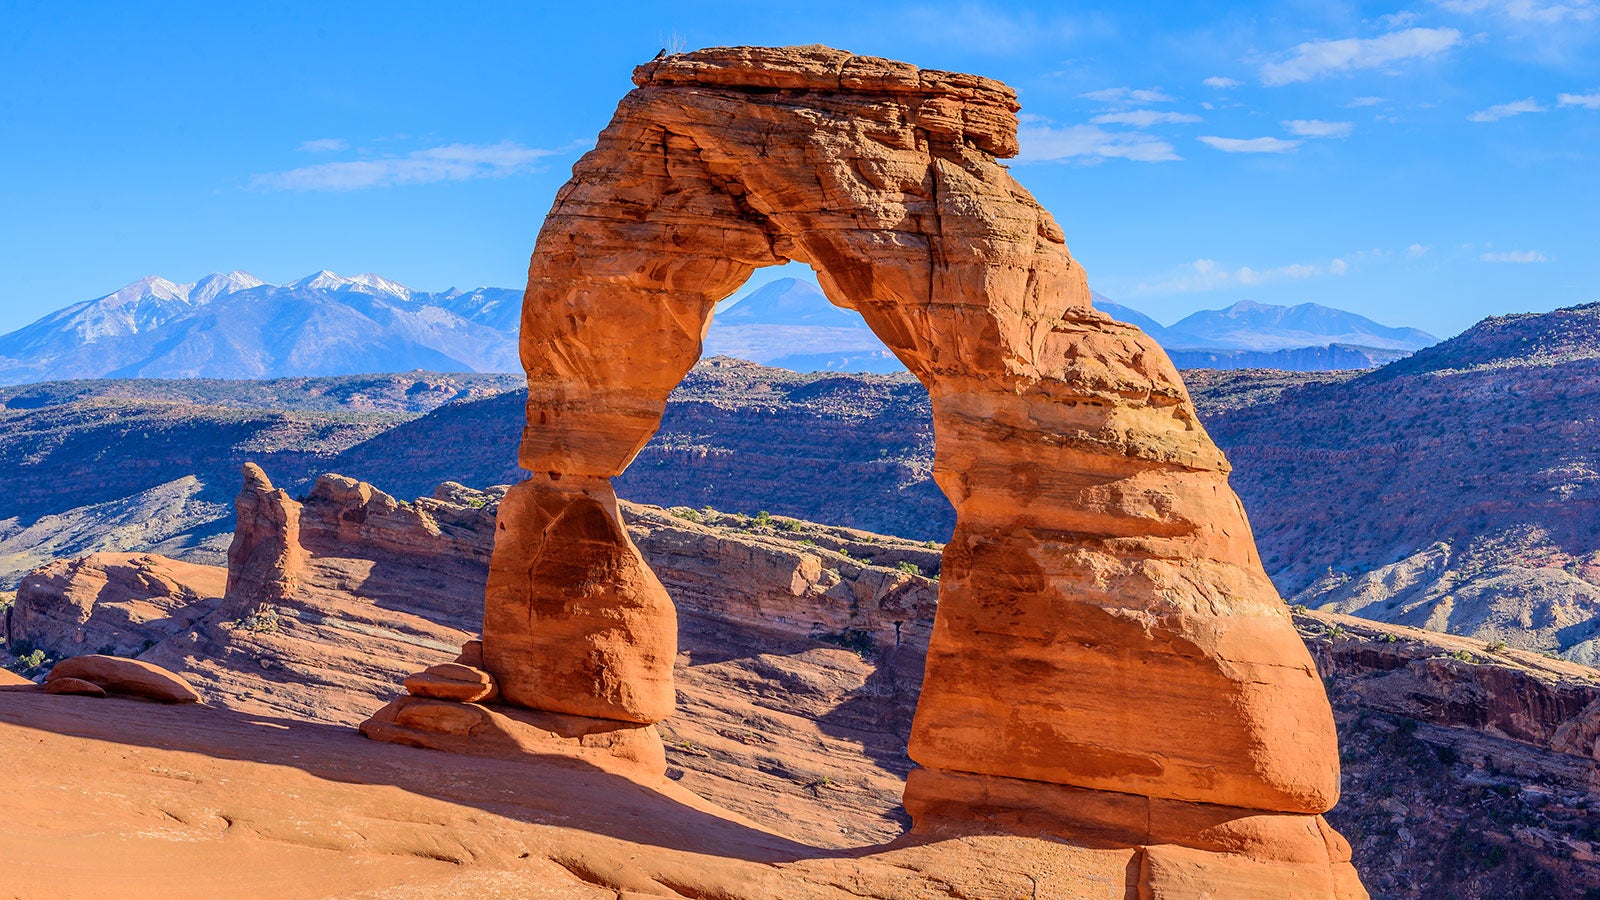 Arches-DelicateArch-LaSalMountains_DP_1600.jpg